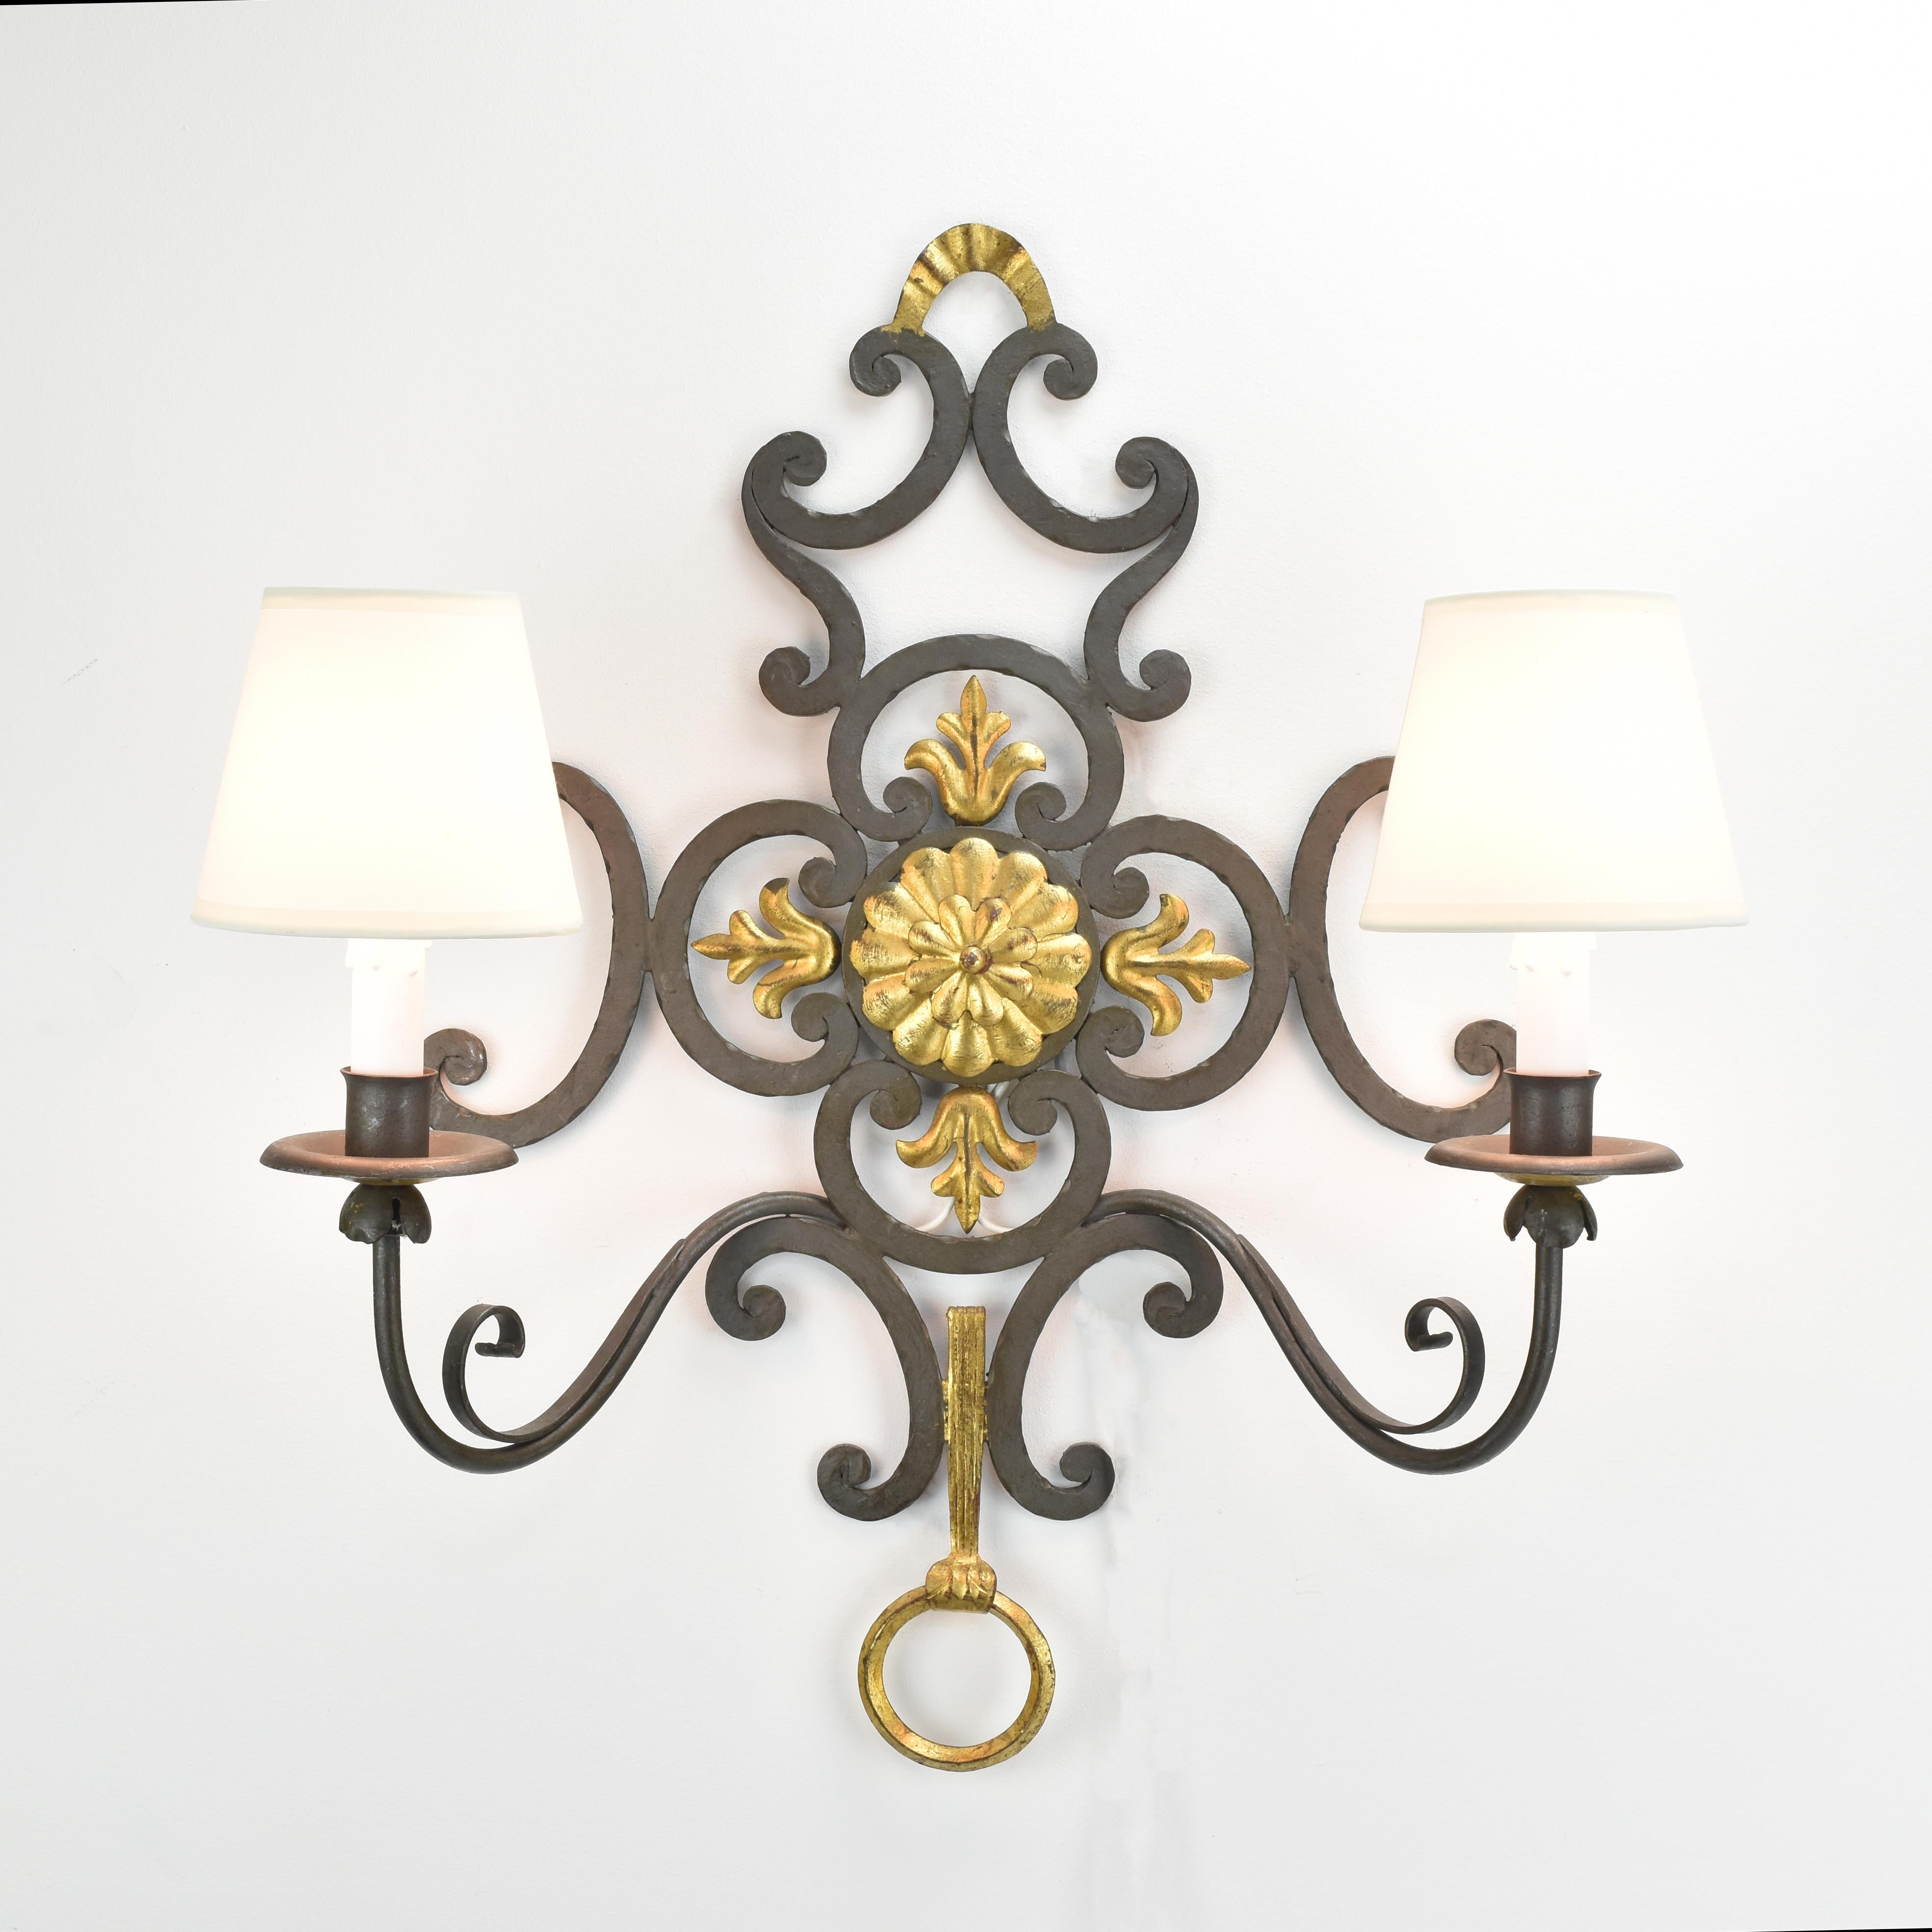 Stunning pair of large cold painted and gilt, wrought iron wall sconces in the manner of Gilbert Poillerat.

Each sconce is painted in matte dark verdigris with gilt accents.

This set is a fantastic eye-catcher for your Finca, entrance area or